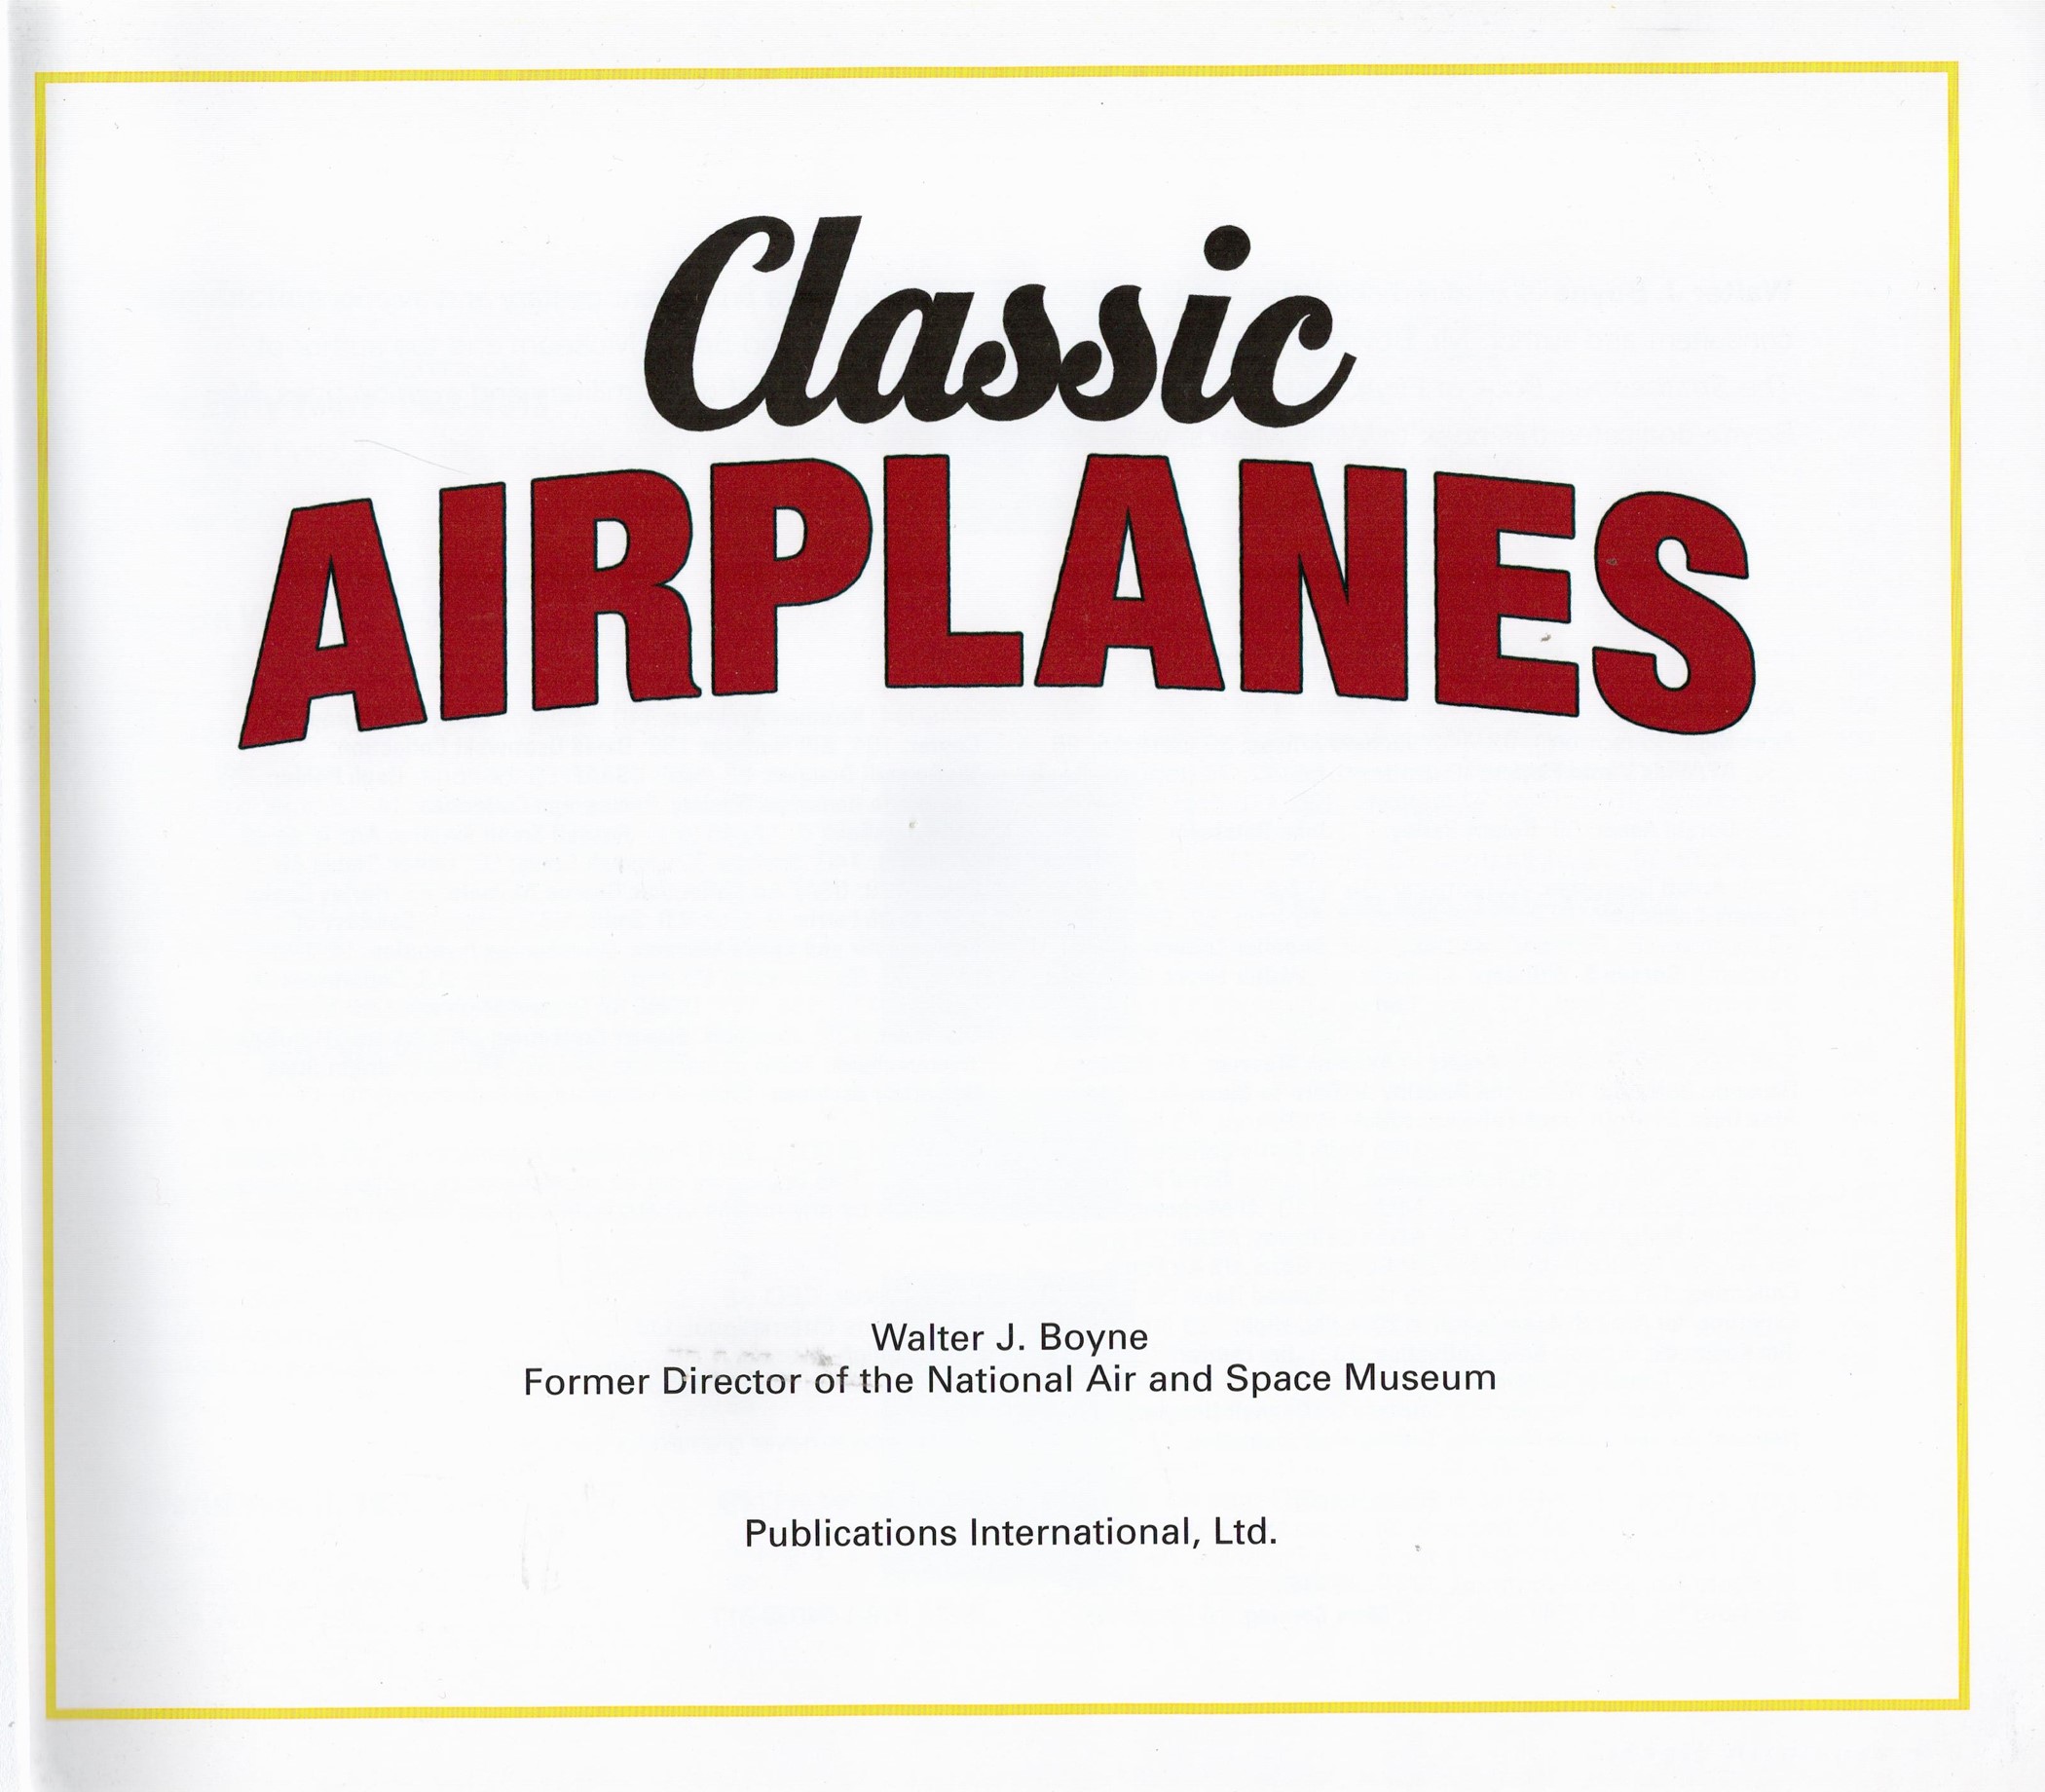 Classic Airplanes by Walter J Boyne Hardback Book 2018 published by Publications International Ltd - Image 2 of 3